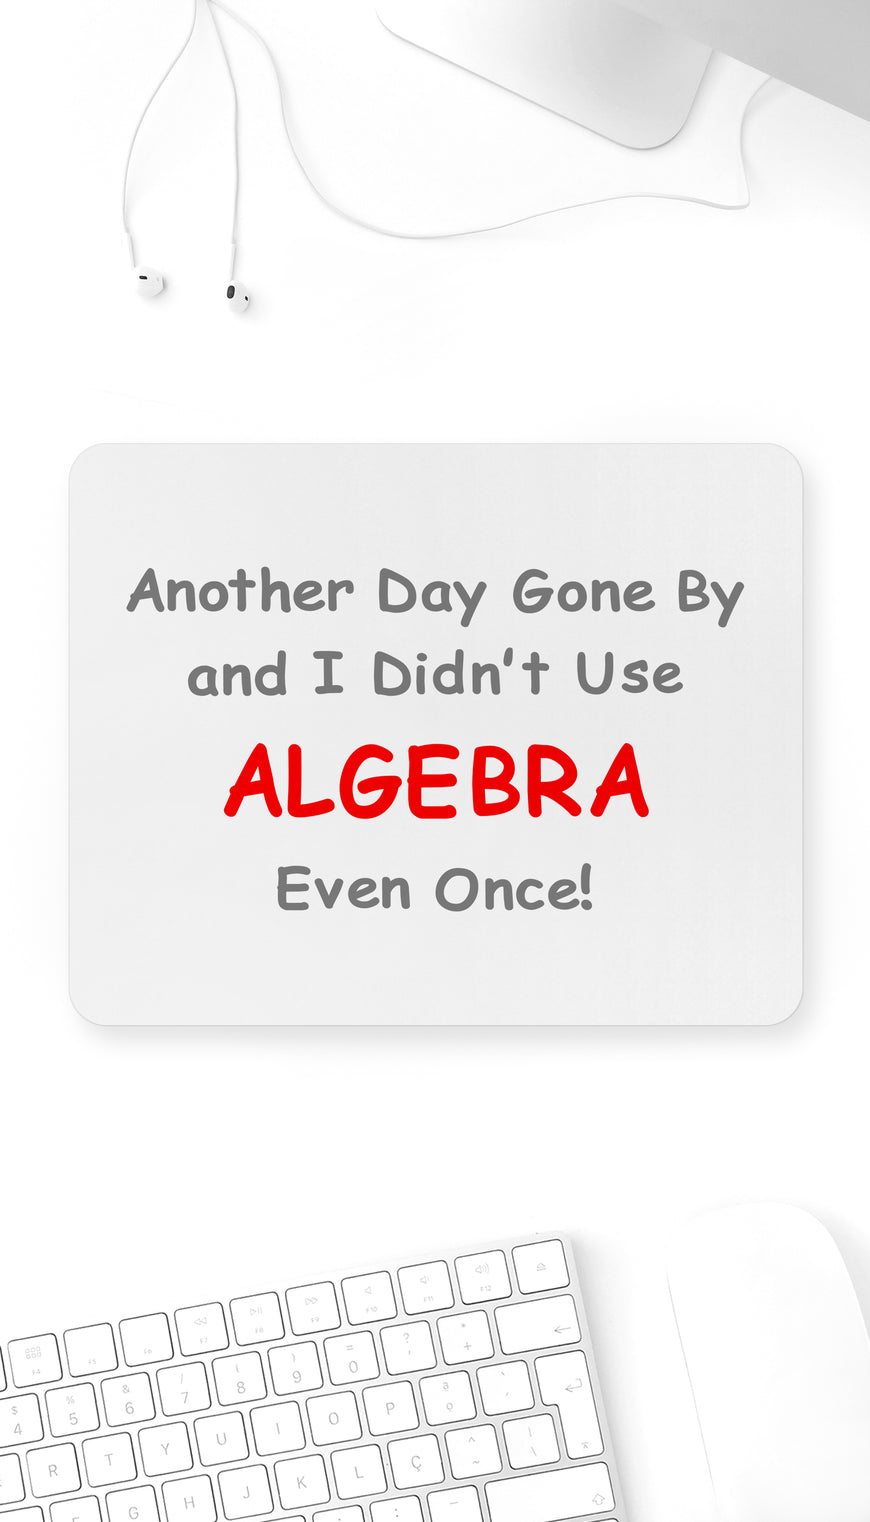 I Didn't Use Algebra Even Once! Funny Office Mouse Pad